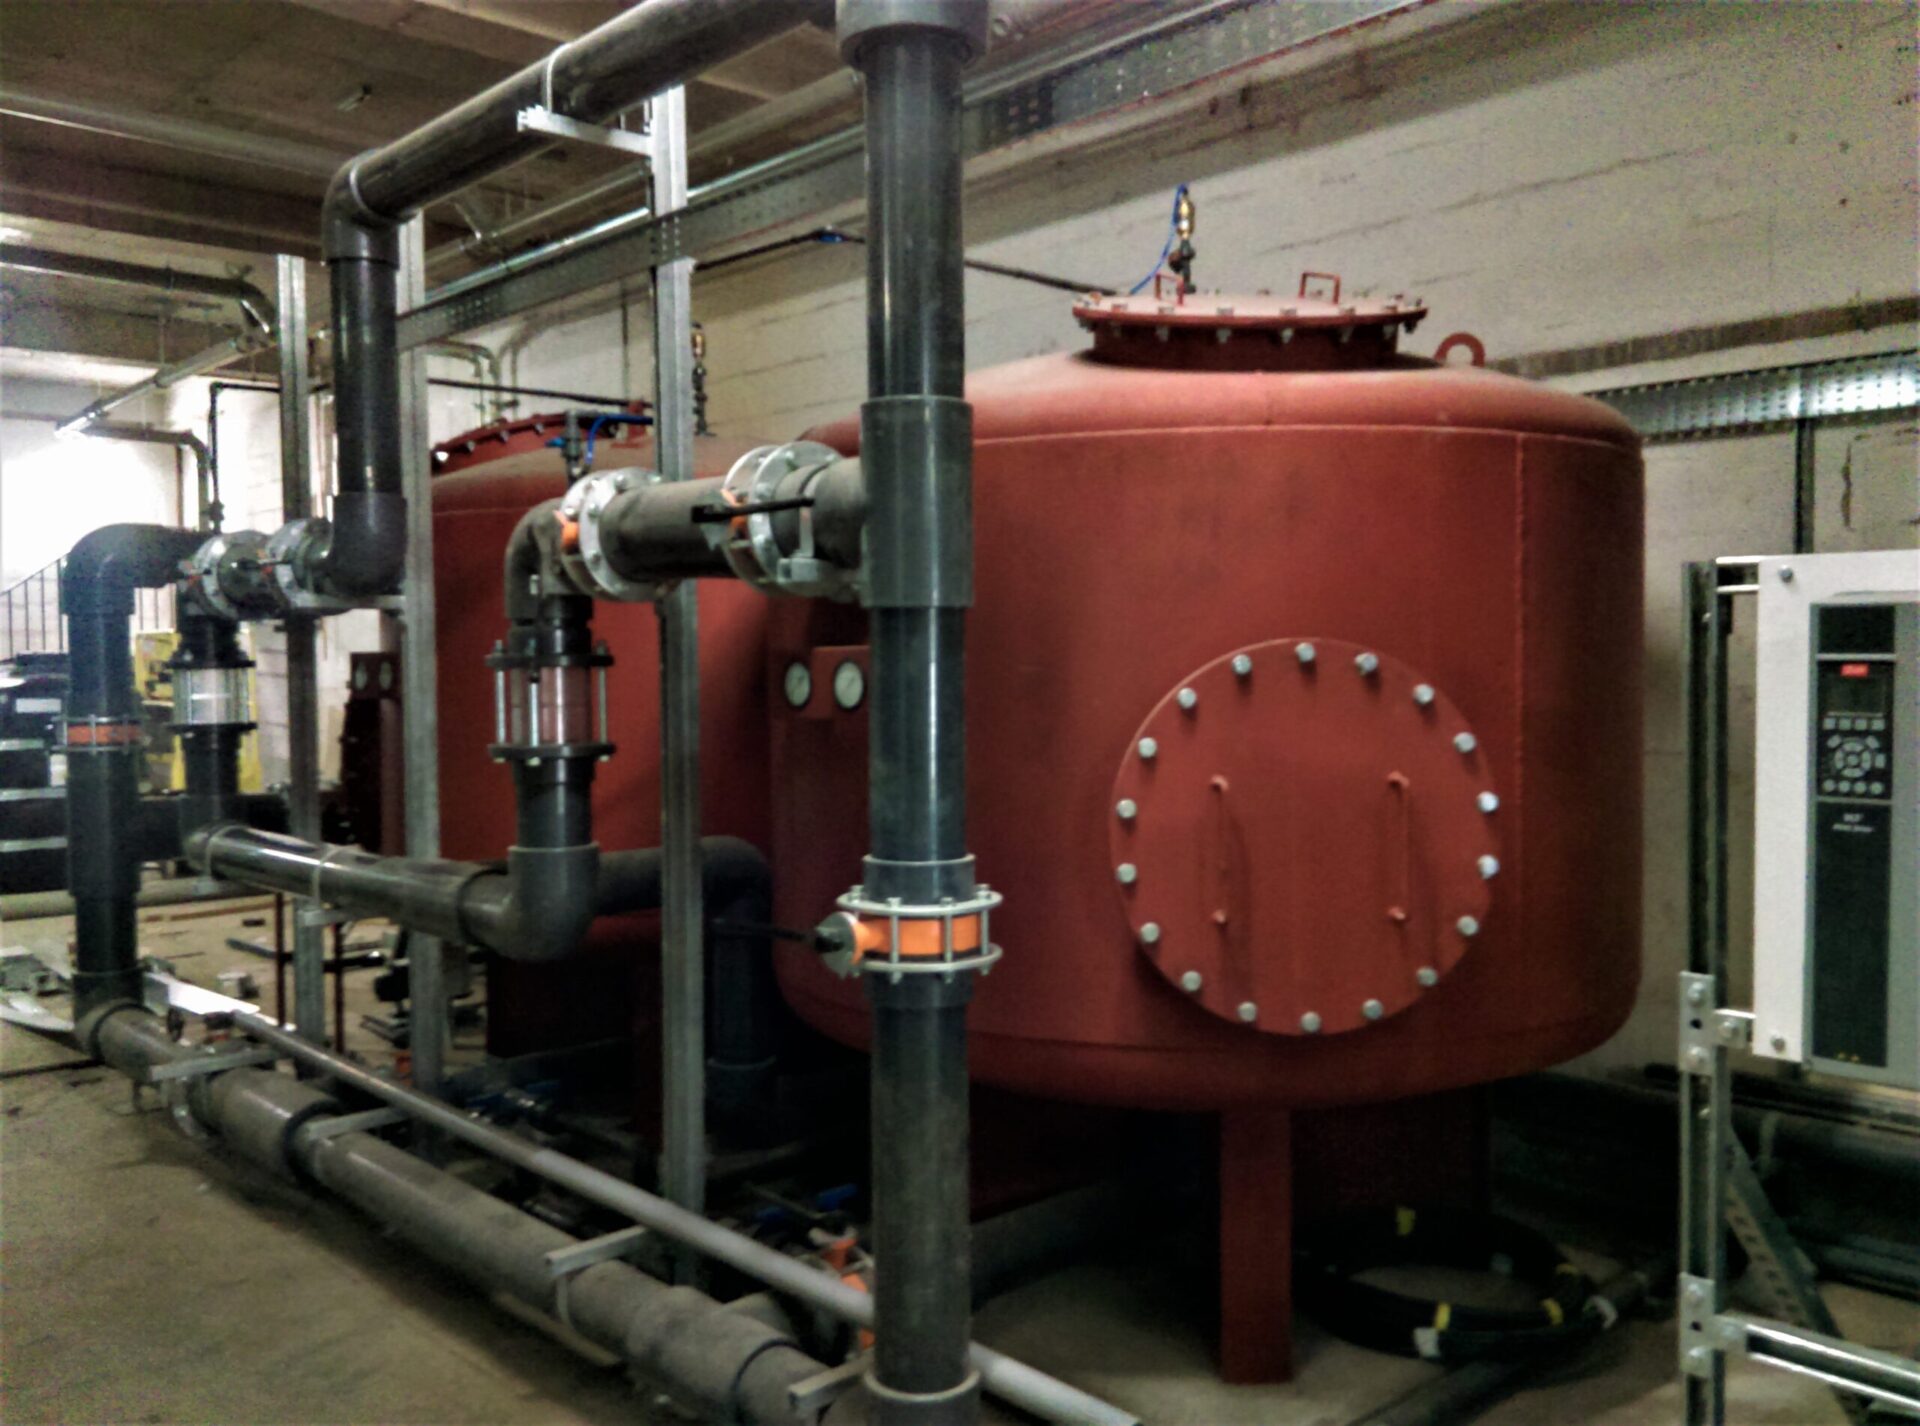 The plant room features a huge range of mechanical & electrical equipment